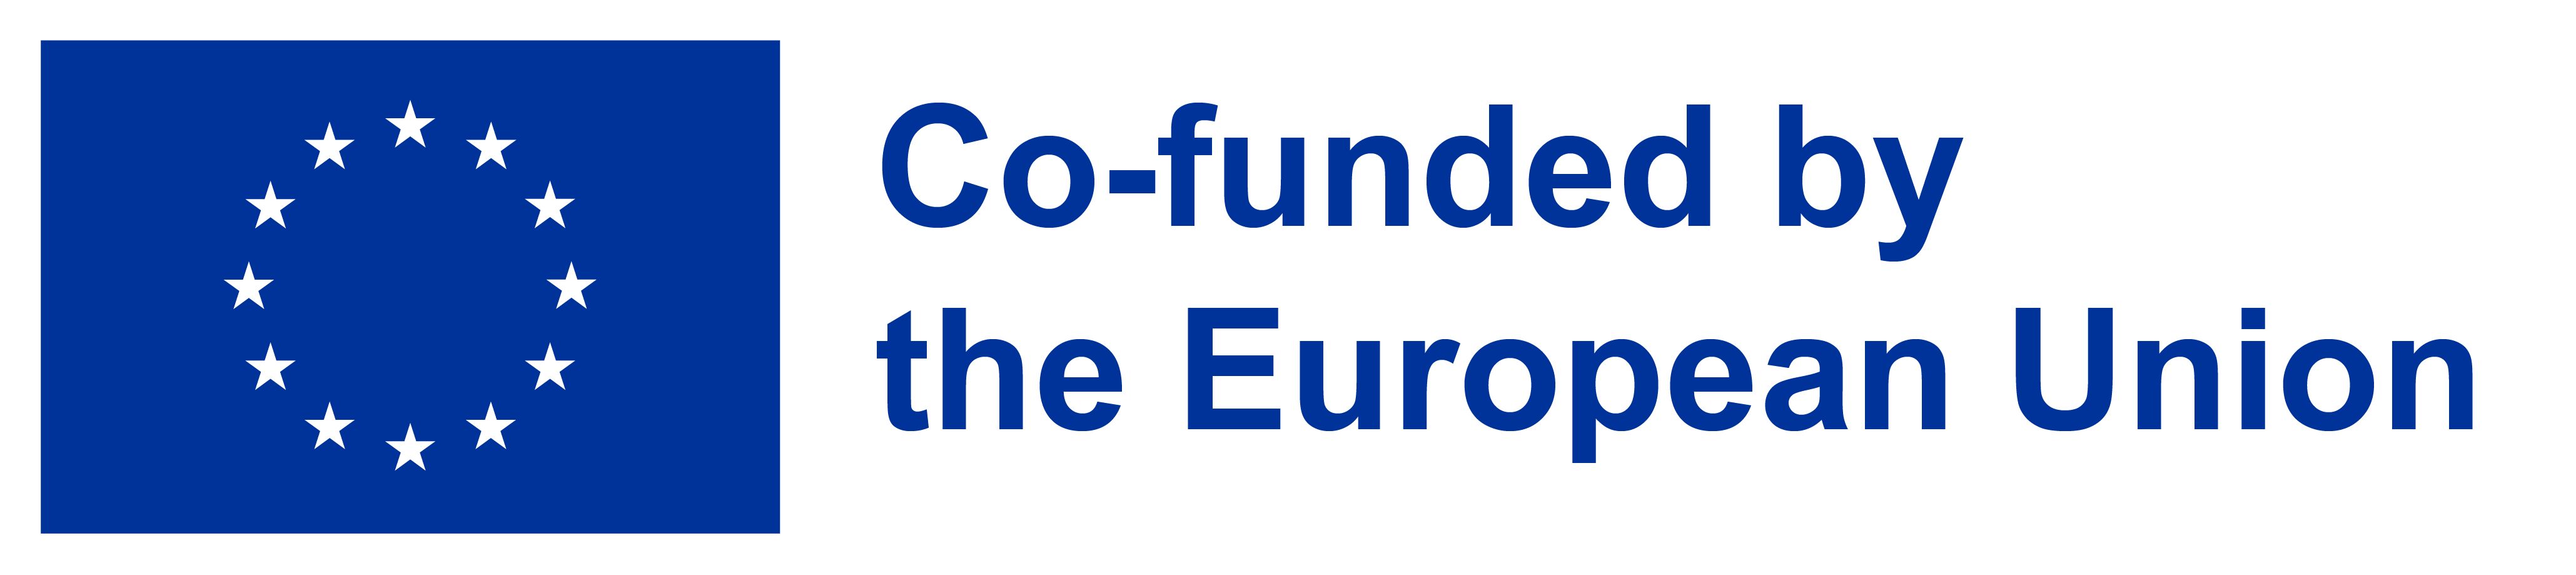 EU Flagge und der Text: Co-funded by the European Union